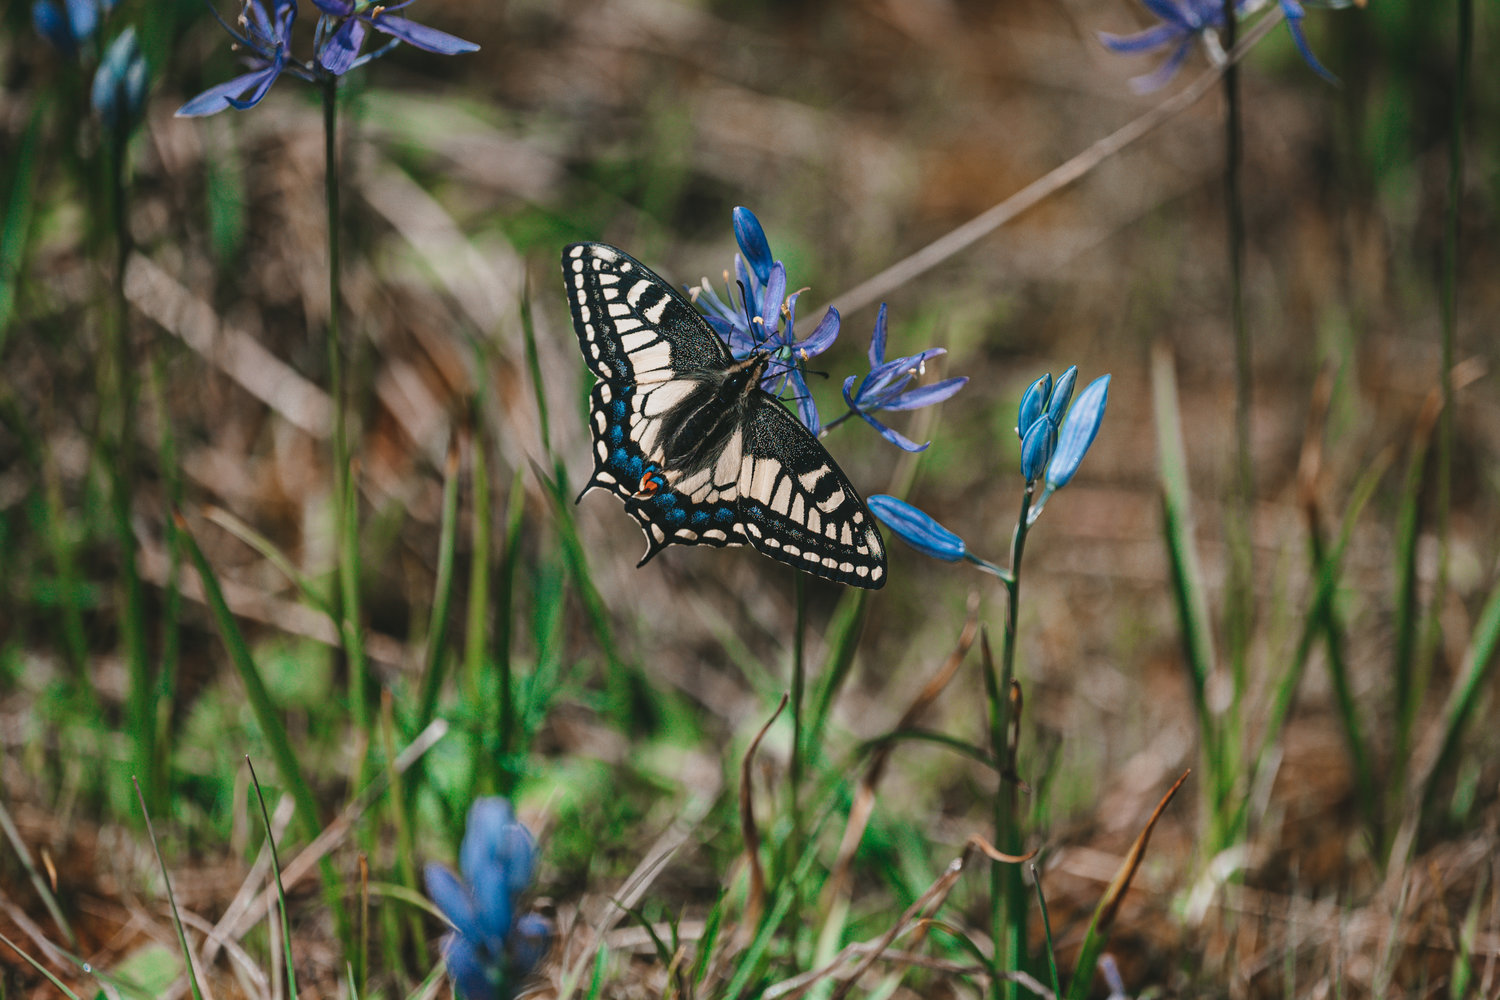 Anise swallowtail butterfly.